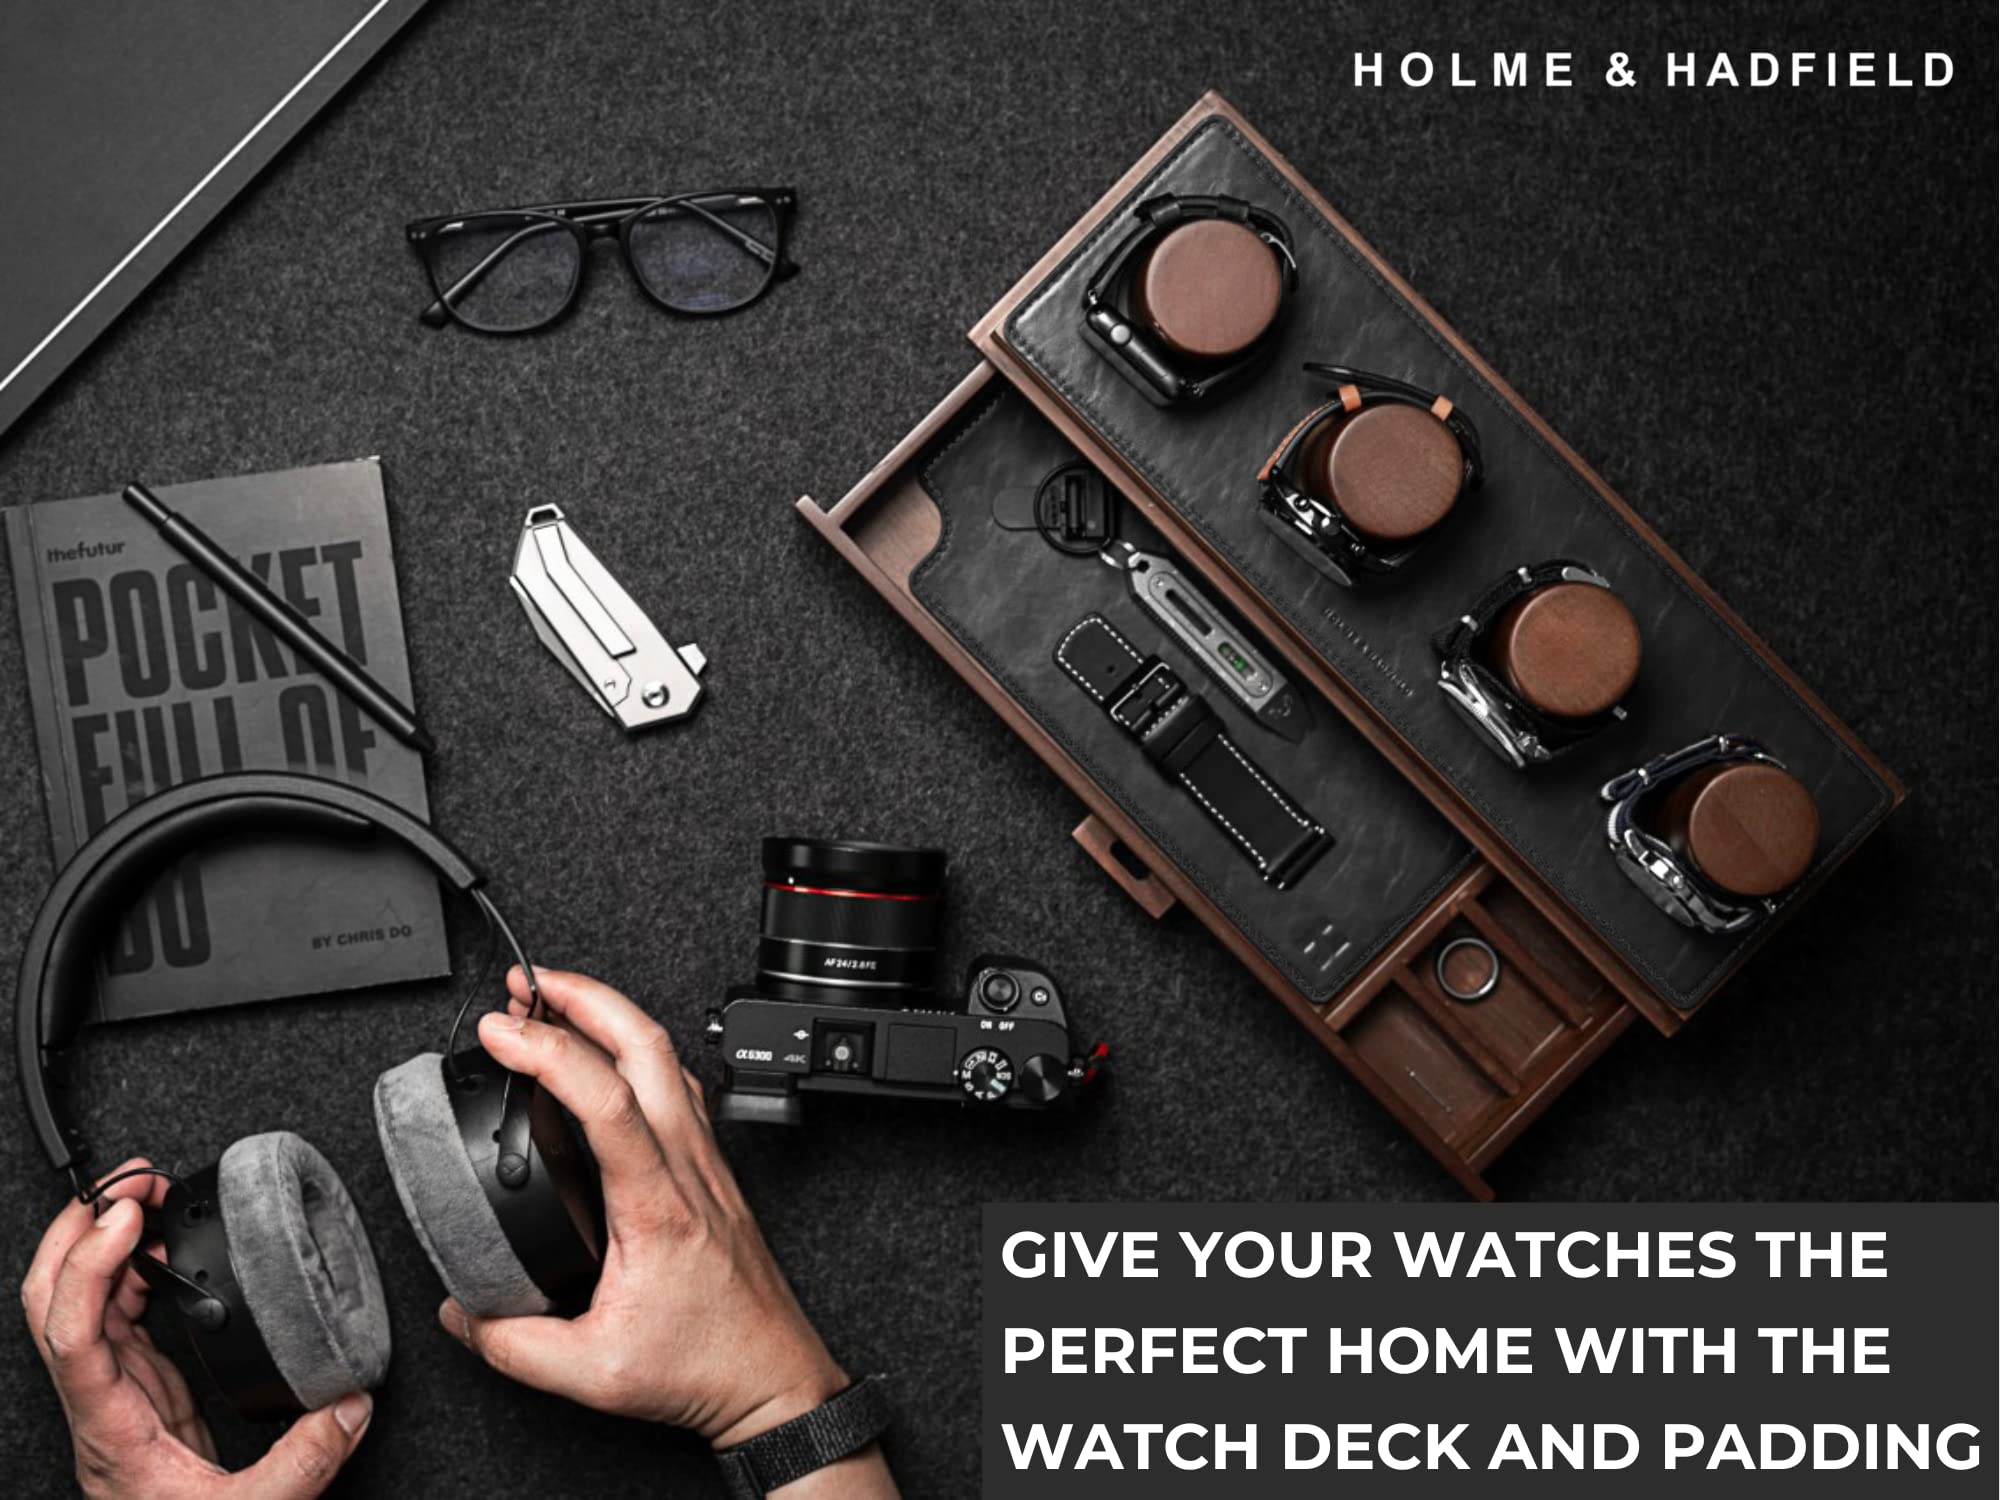 Holme & Hadfield The Watch Deck with Vegan Leather Padding for Extra Protection and Luxurious Finish – Lifetime Assurance Included